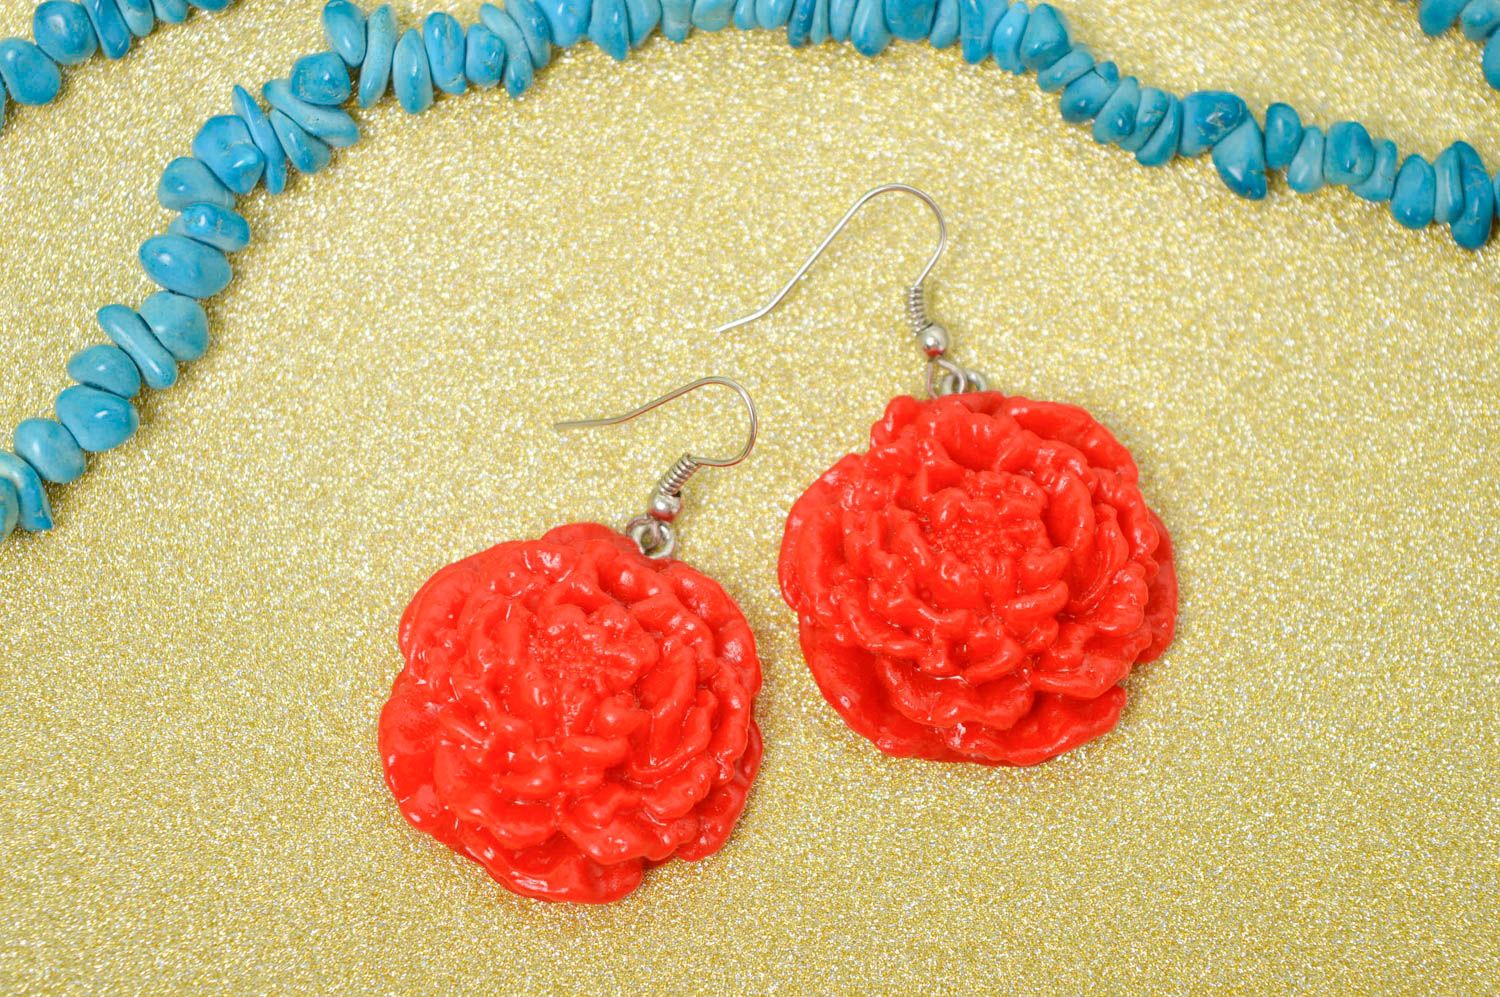 Small handmade earrings plastic flower earrings polymer clay ideas small gifts photo 1